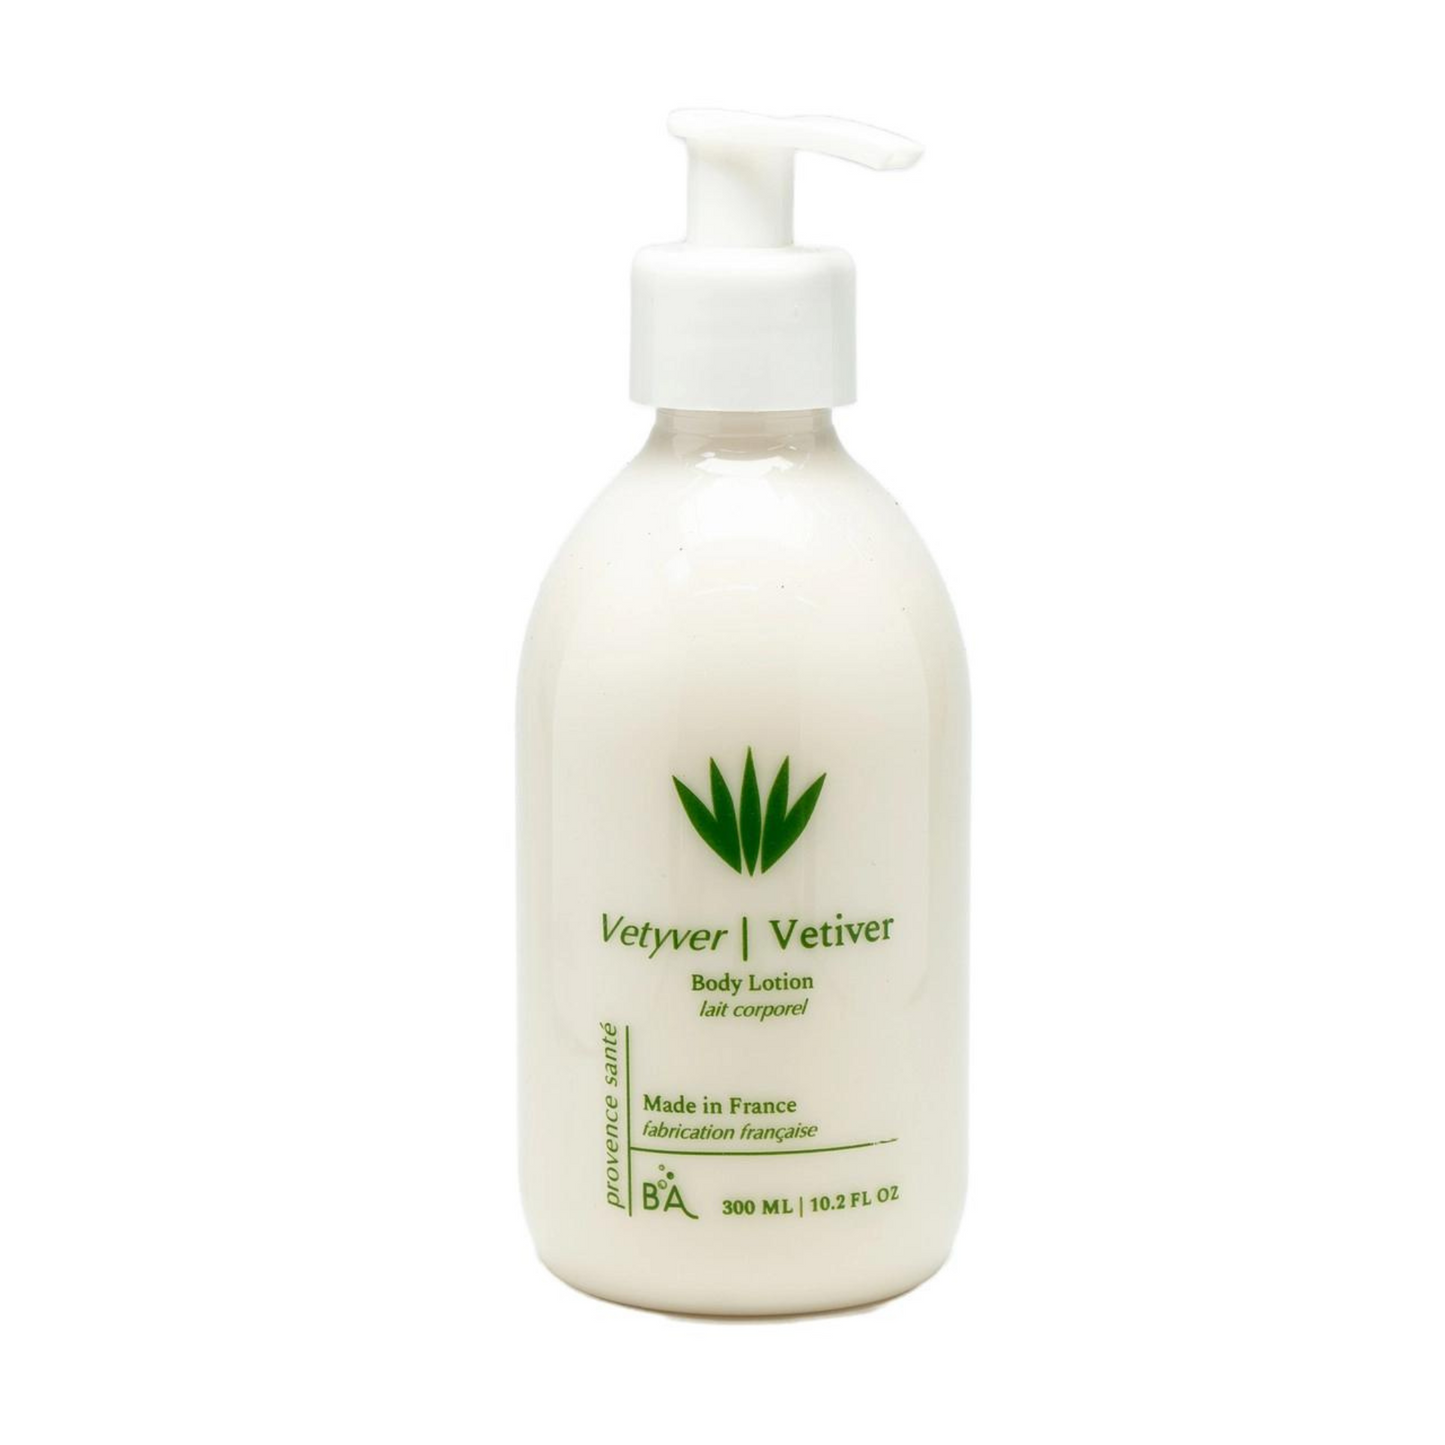 Primary image of Vetiver Body Lotion